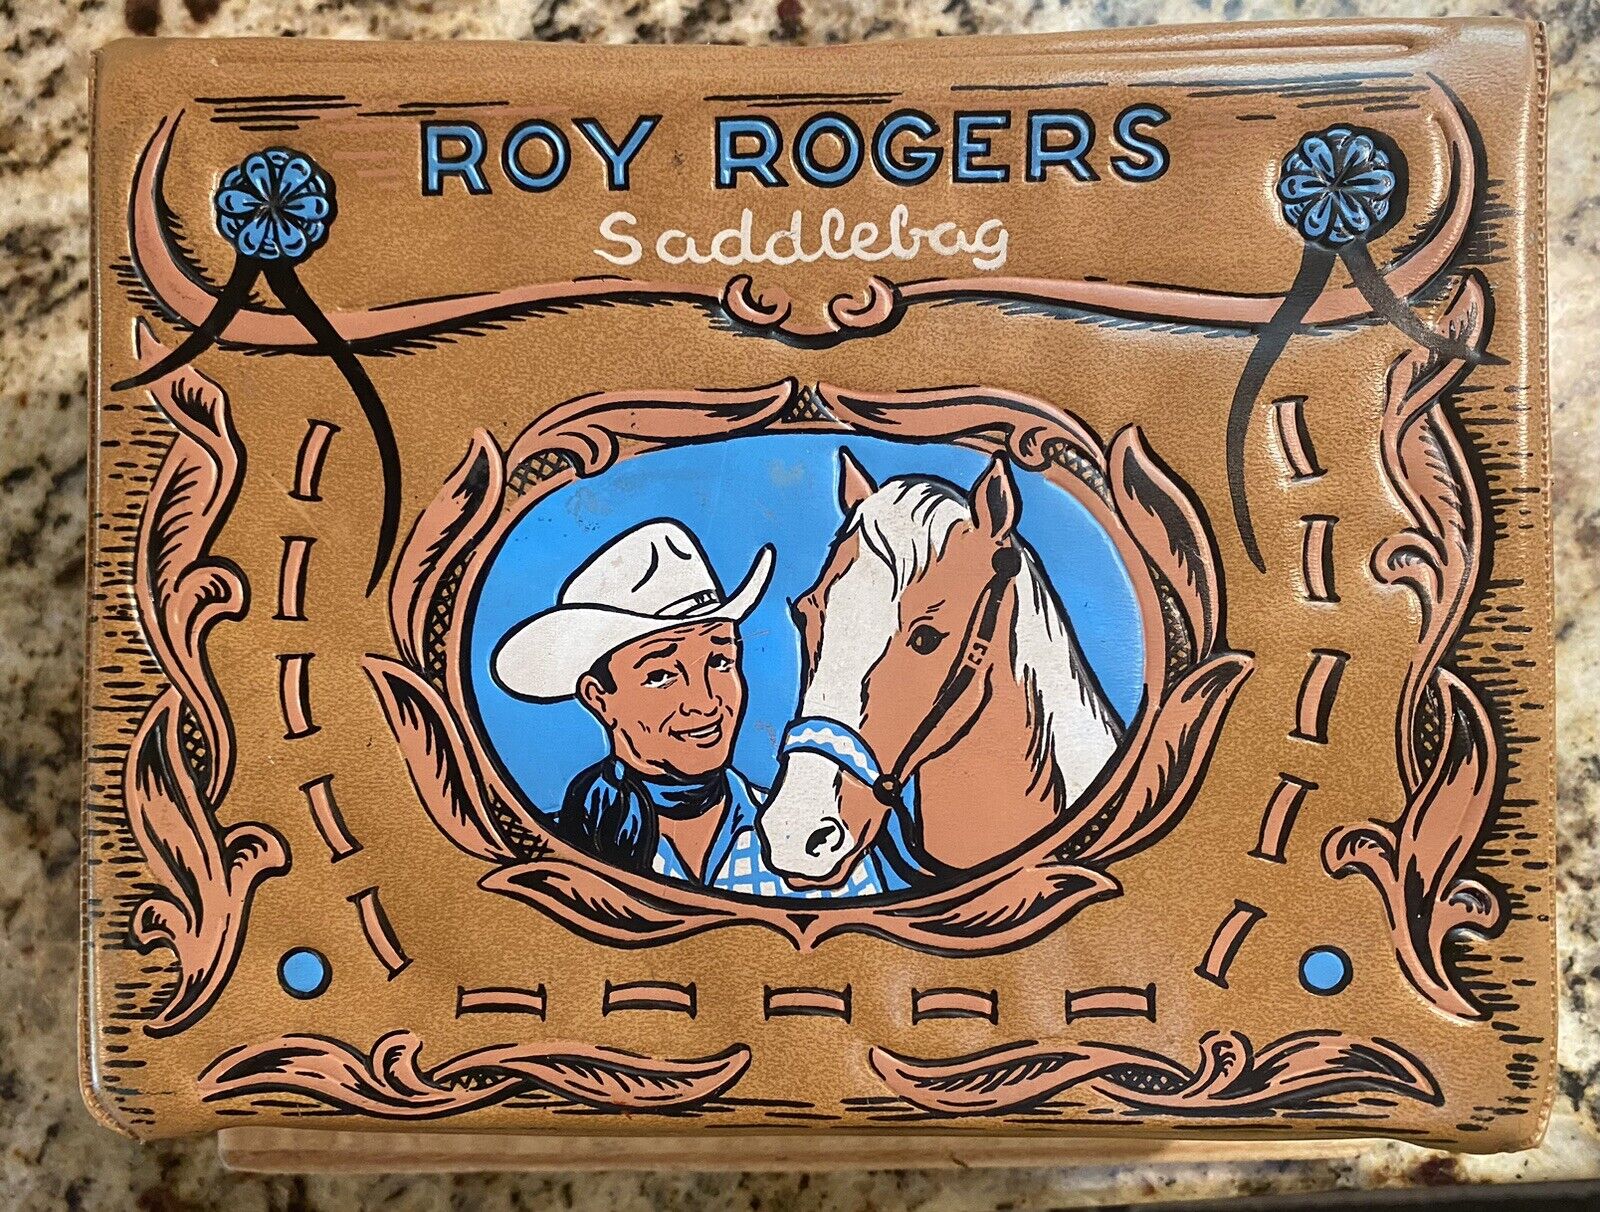 ROY ROGERS & TRIGGER 1960  Brown Saddlebag Vinyl Lunchbox - NO thermos NICE COND